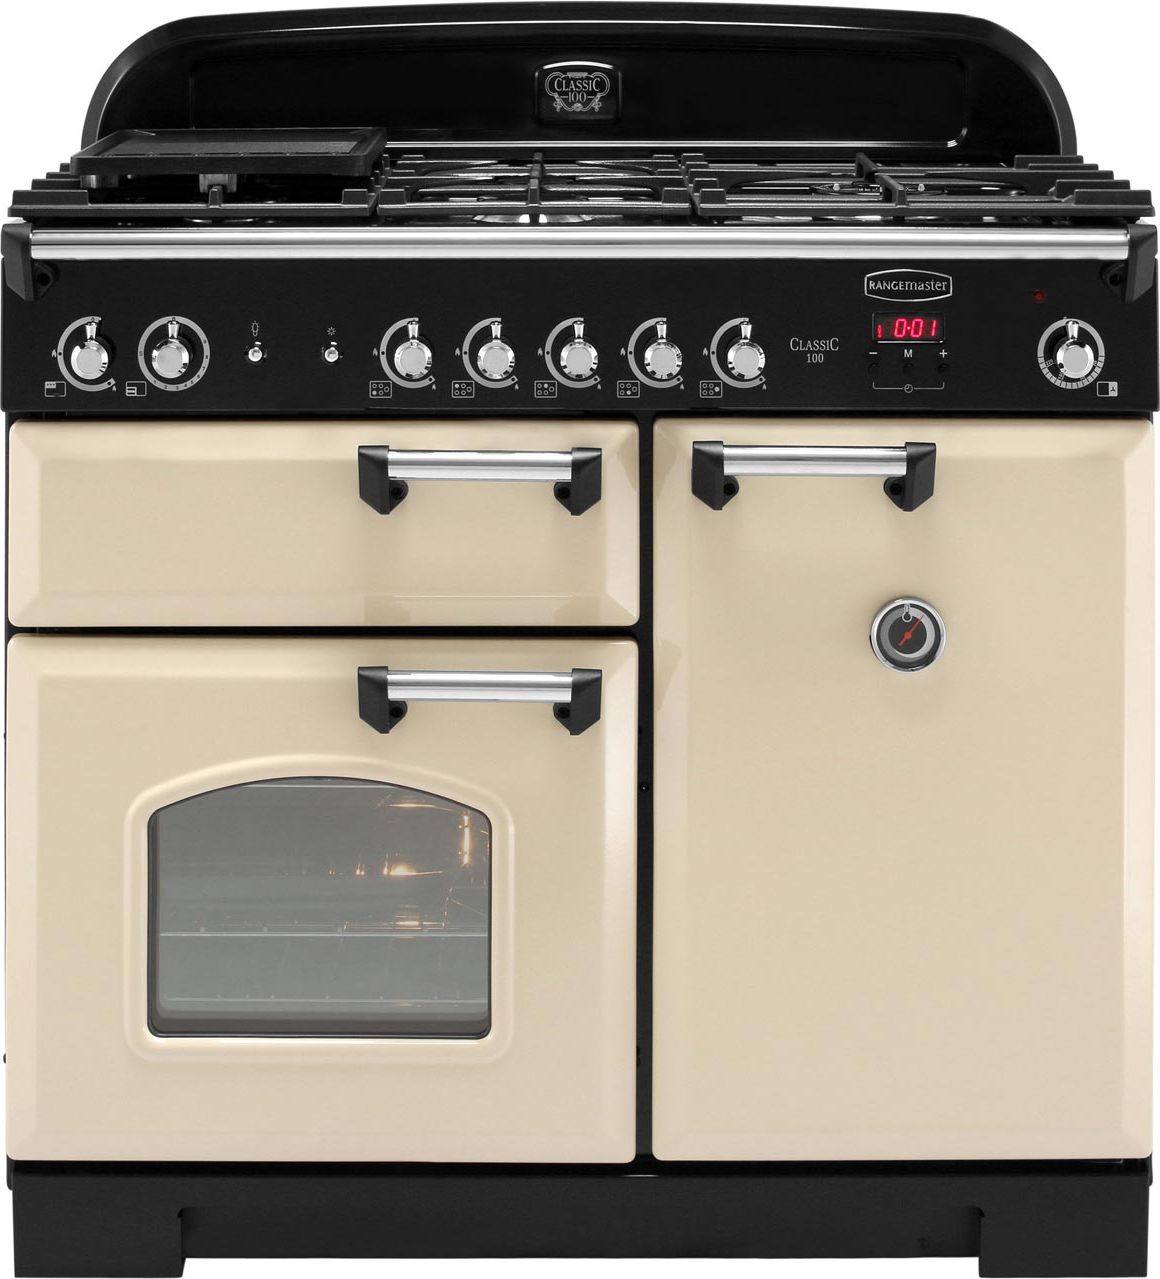 Rangemaster Classic CLA100NGFCR/C 100cm Gas Range Cooker with Electric Fan Oven - Cream / Chrome - A+/A Rated, Cream